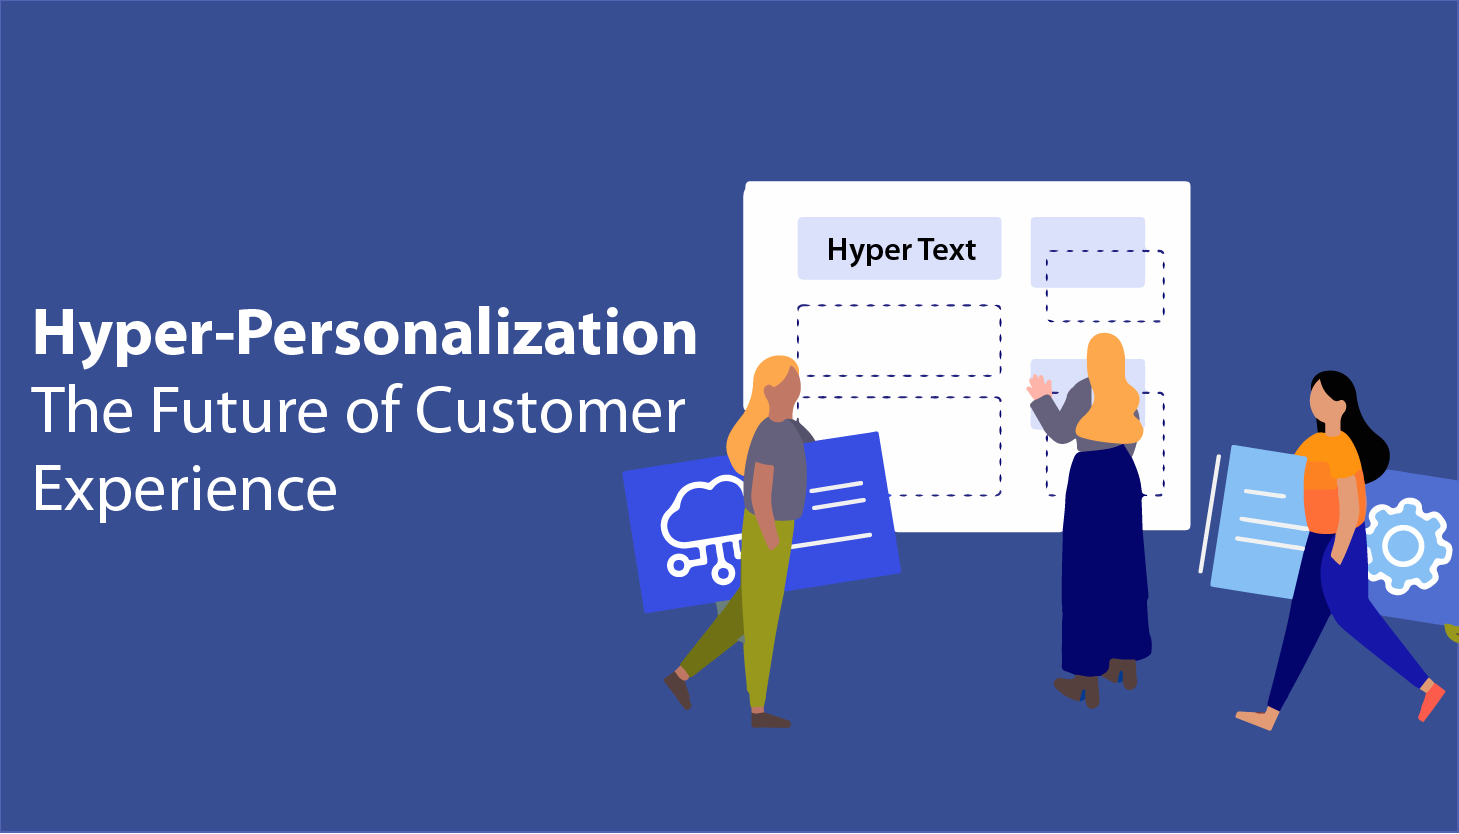  Why Hyper-Personalization Is the Future of Customer Experience